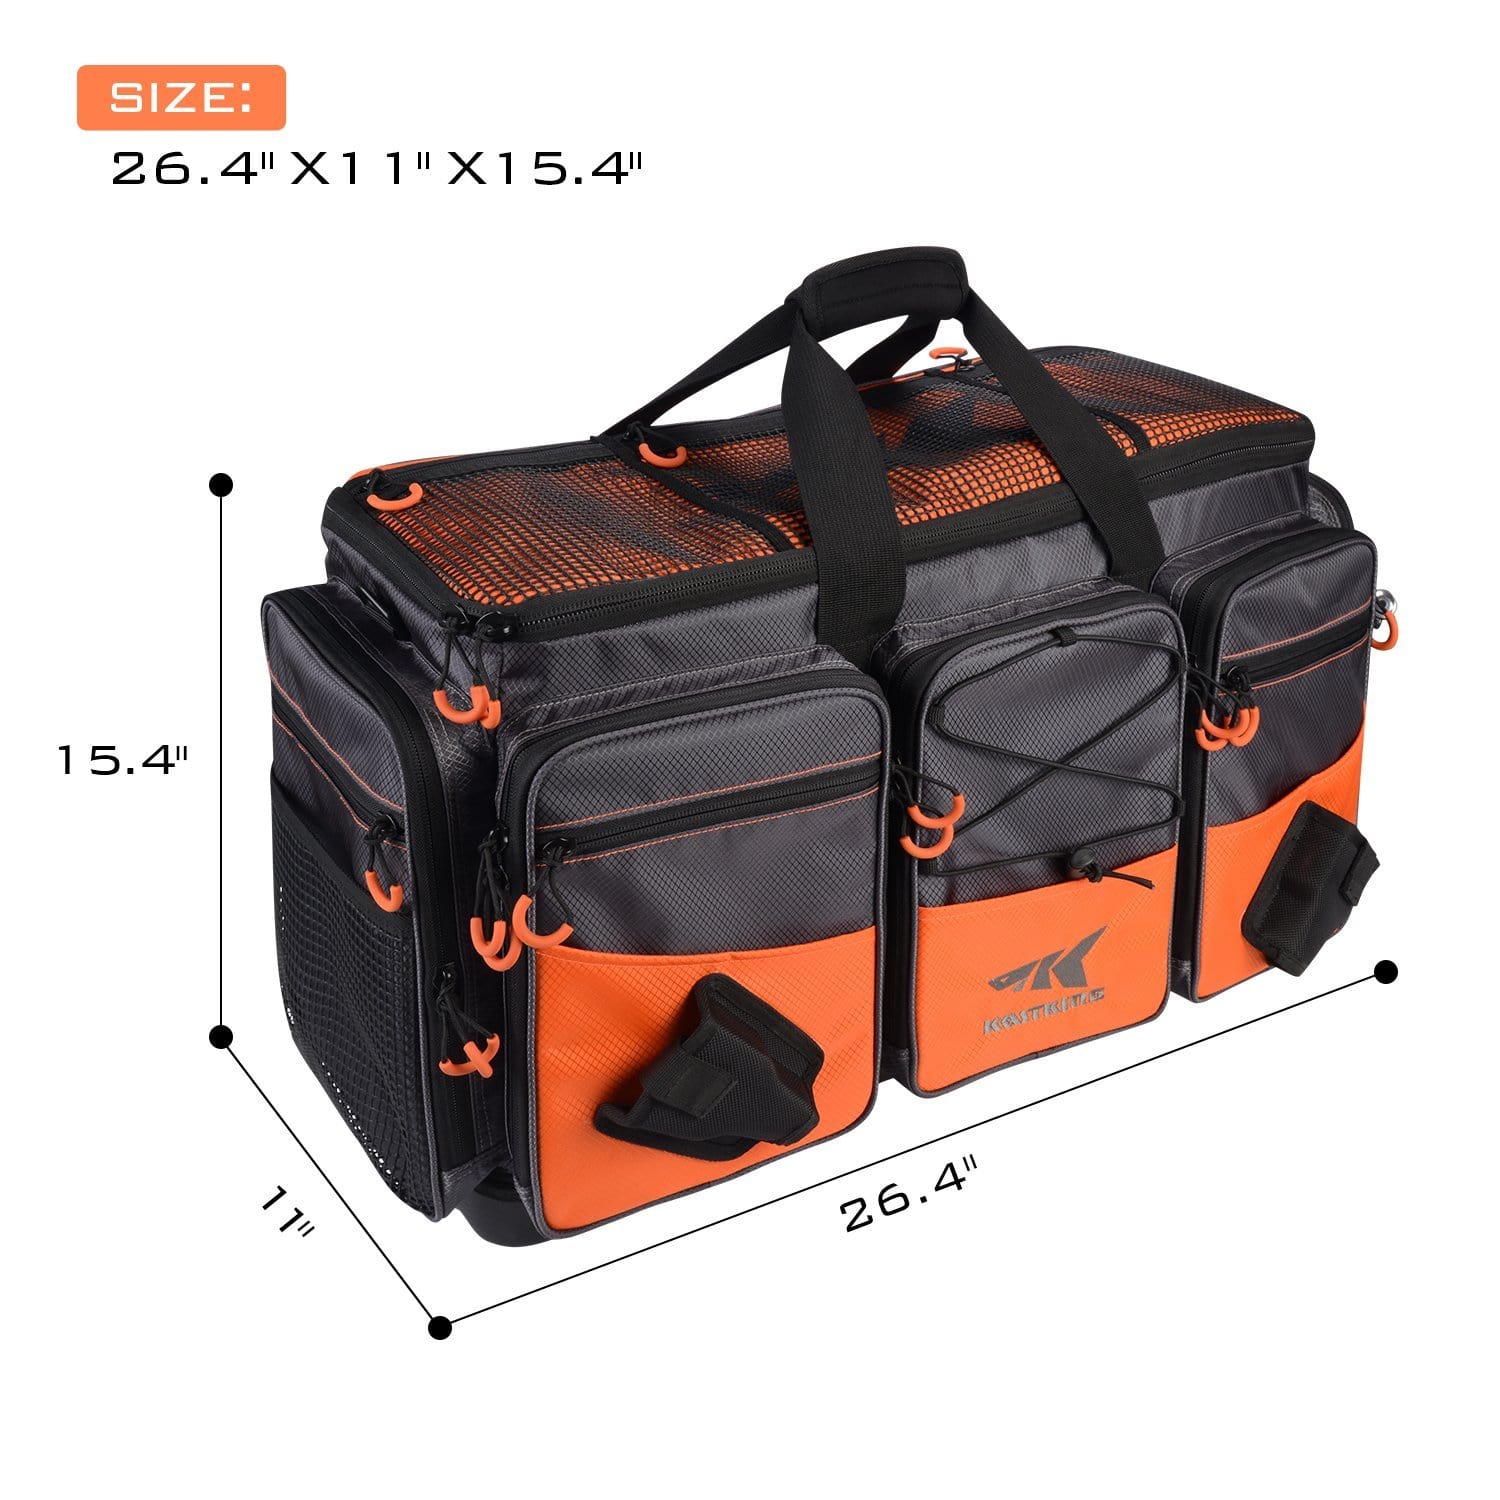 KastKing Pond Hopper Fishing Sling Tackle Bag - Lightweight Fishing Sling  Chest Pack, Sling Tool Bag for Fishing Hiking Hunting Camping,with (1) 3600  Box,17.7x12.6x6 Inches,Orange : Buy Online at Best Price in